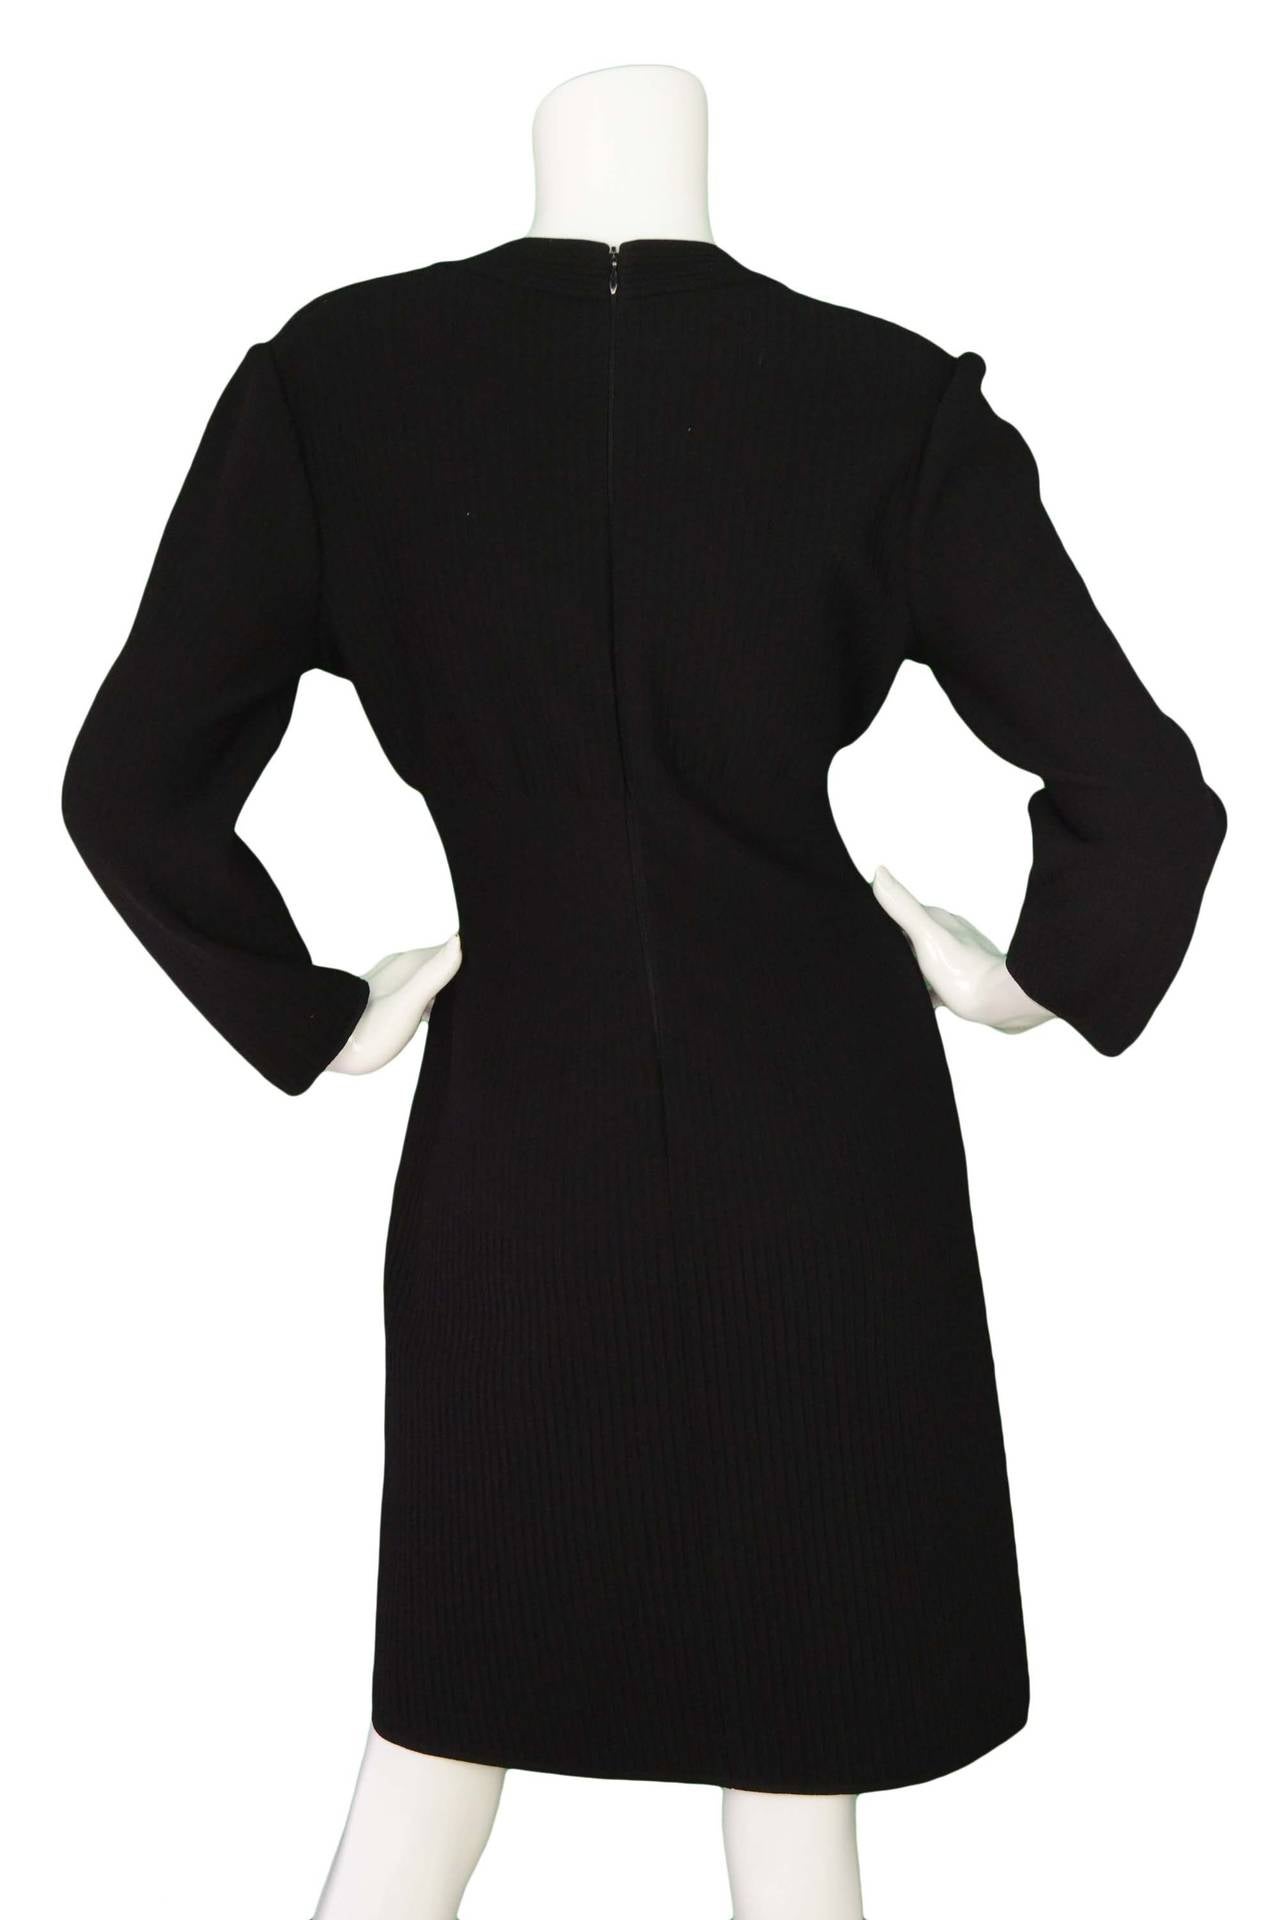 ALAÏA Black Ribbed Wool 3/4 Sleeve V-Neck Dress sz 42 In Excellent Condition In New York, NY